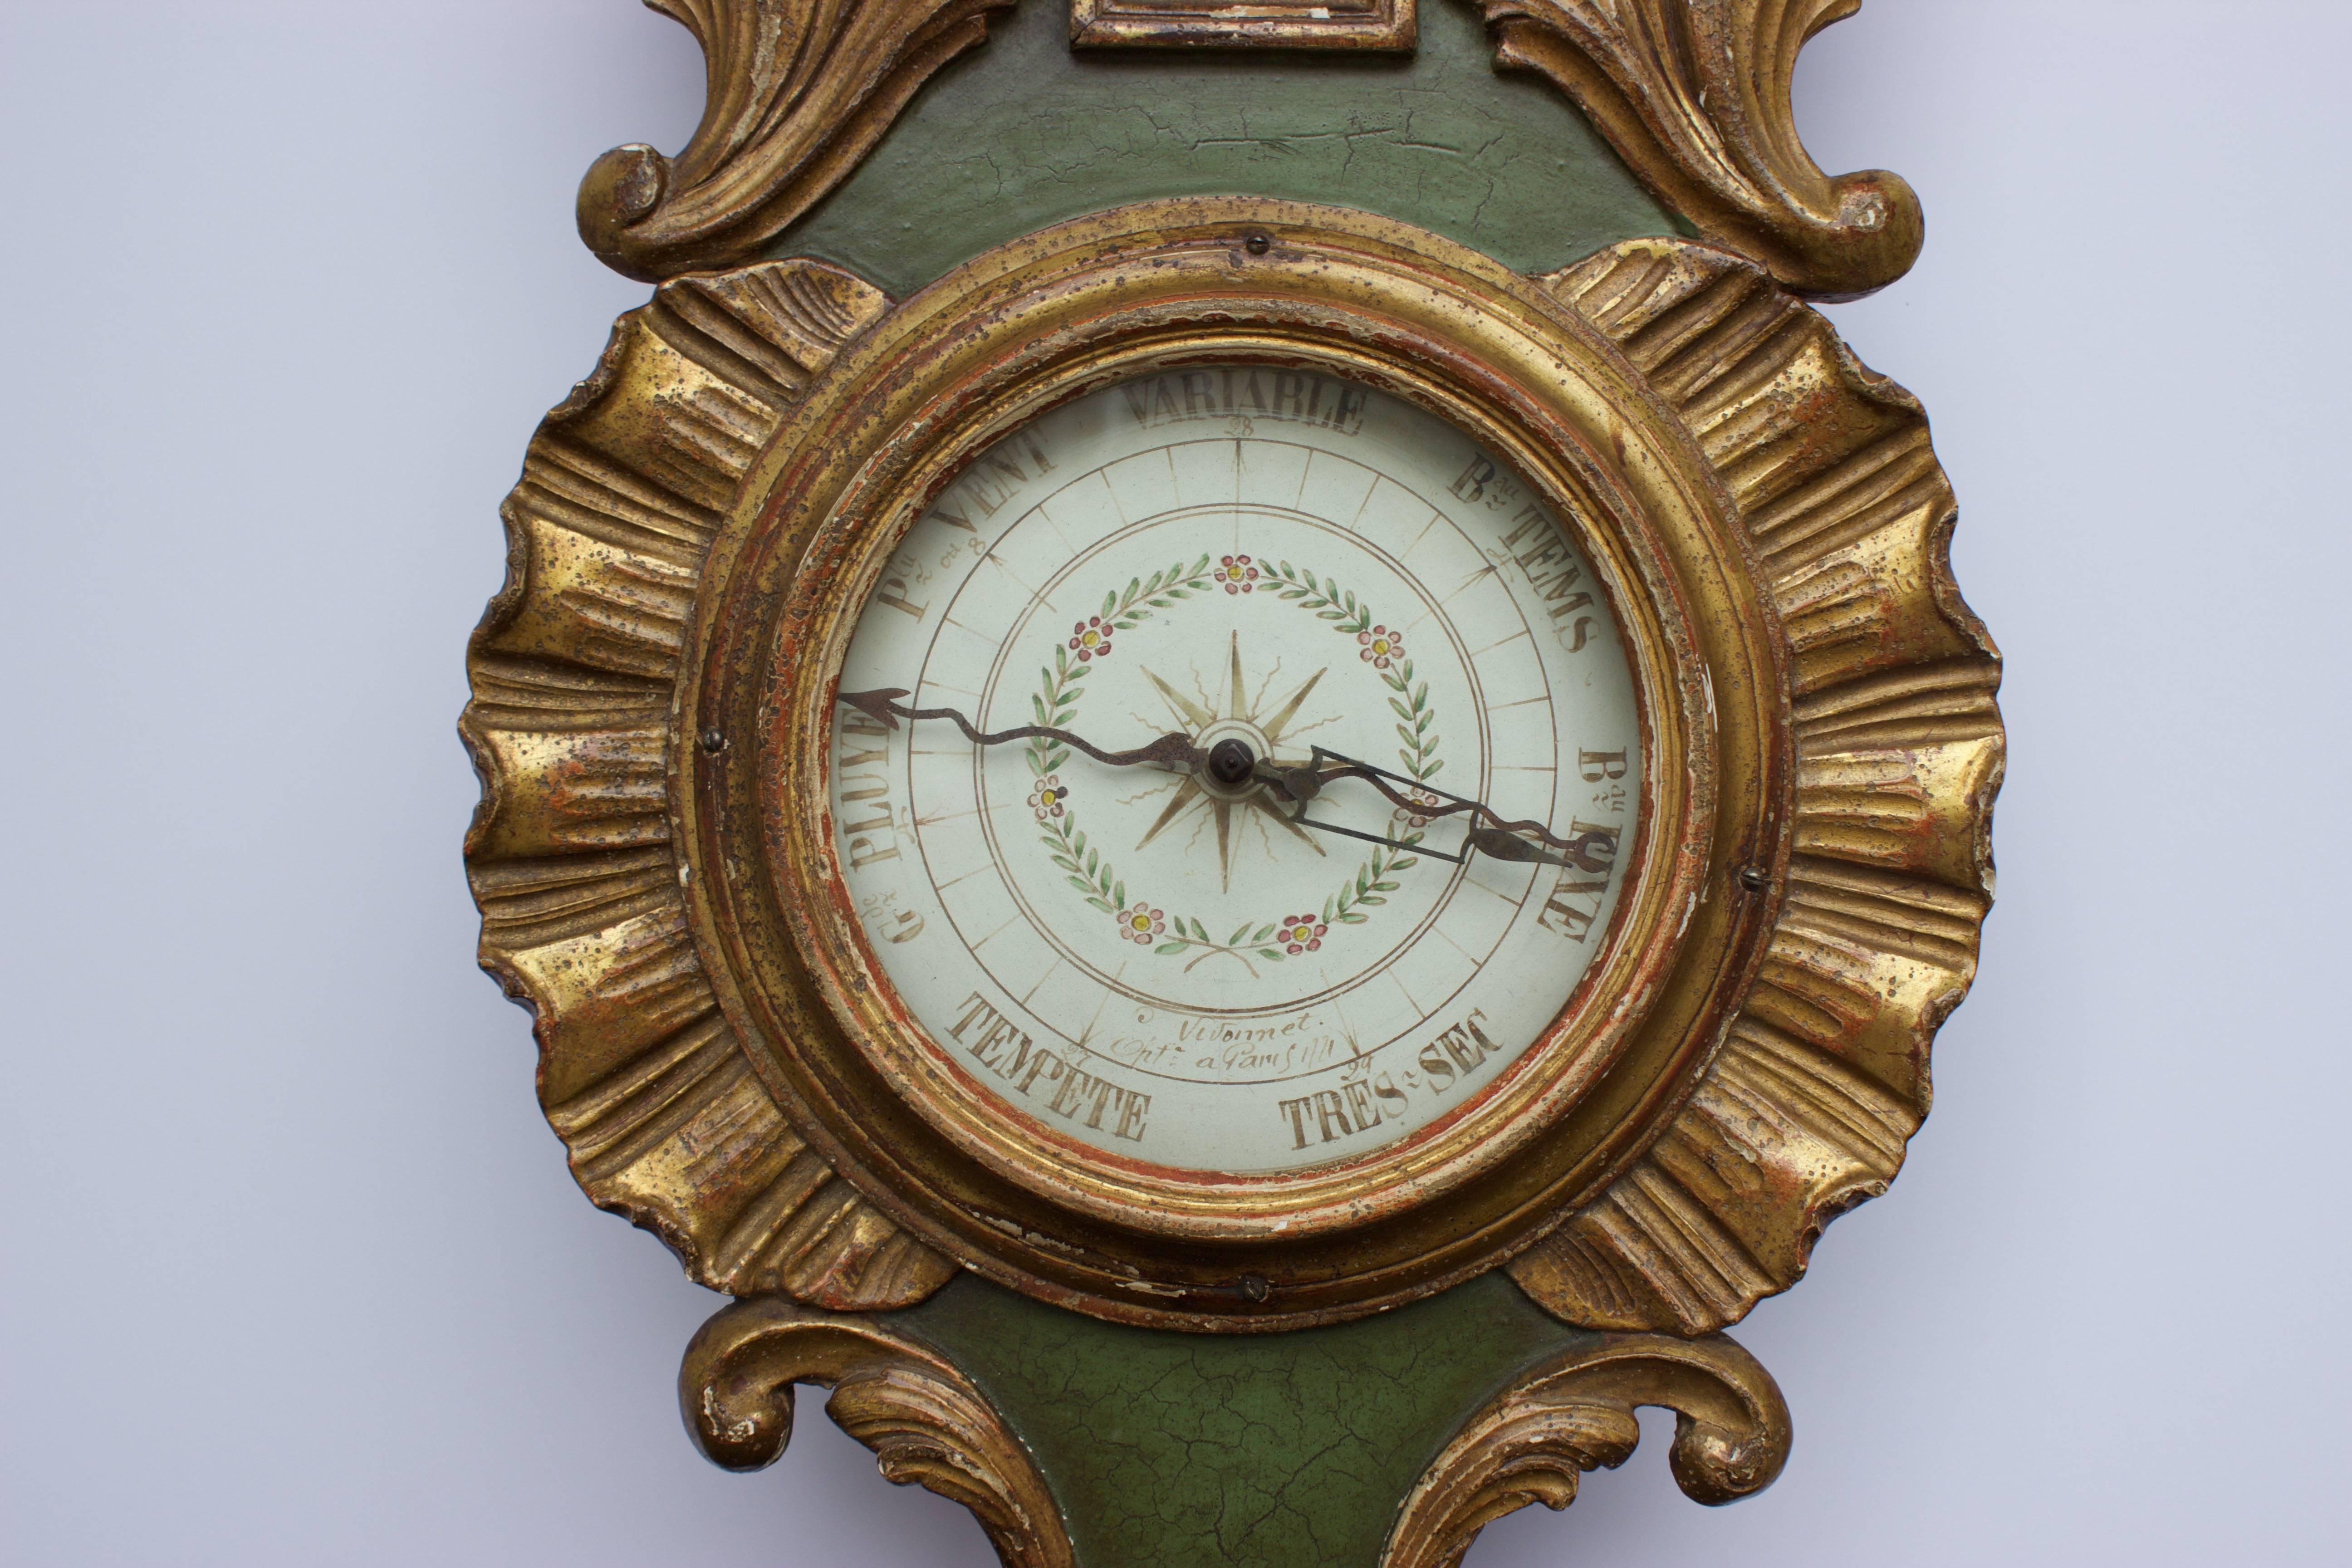 Extremely deco barometer and thermometer in carved and gilded wood acanthus leaves. The barometer face is protected by a glass globe and set within a decor of carved and gilded 